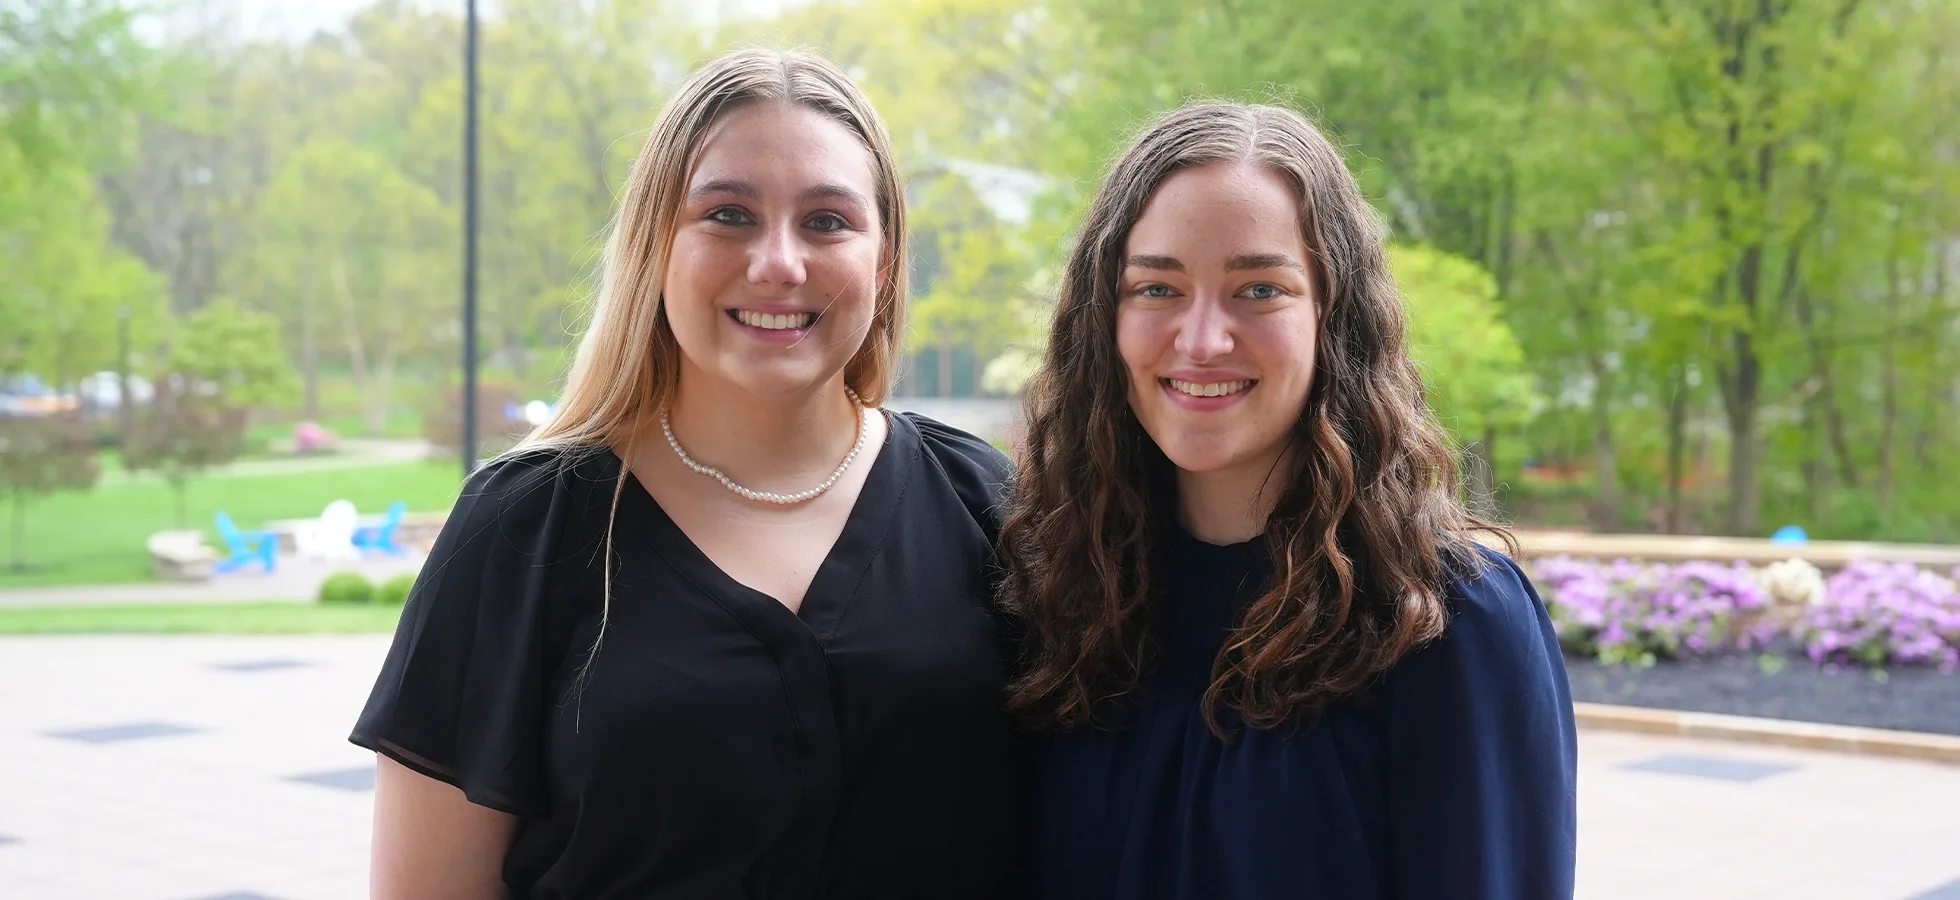 Assumption University has announced that Emily Fasteson, a Theology and Mathematics double major, has been named Valedictorian, and Shaeleigh Boynton, a Psychology major with a concentration in child and adolescent development, has been named Salutatorian for the Class of 2024. 